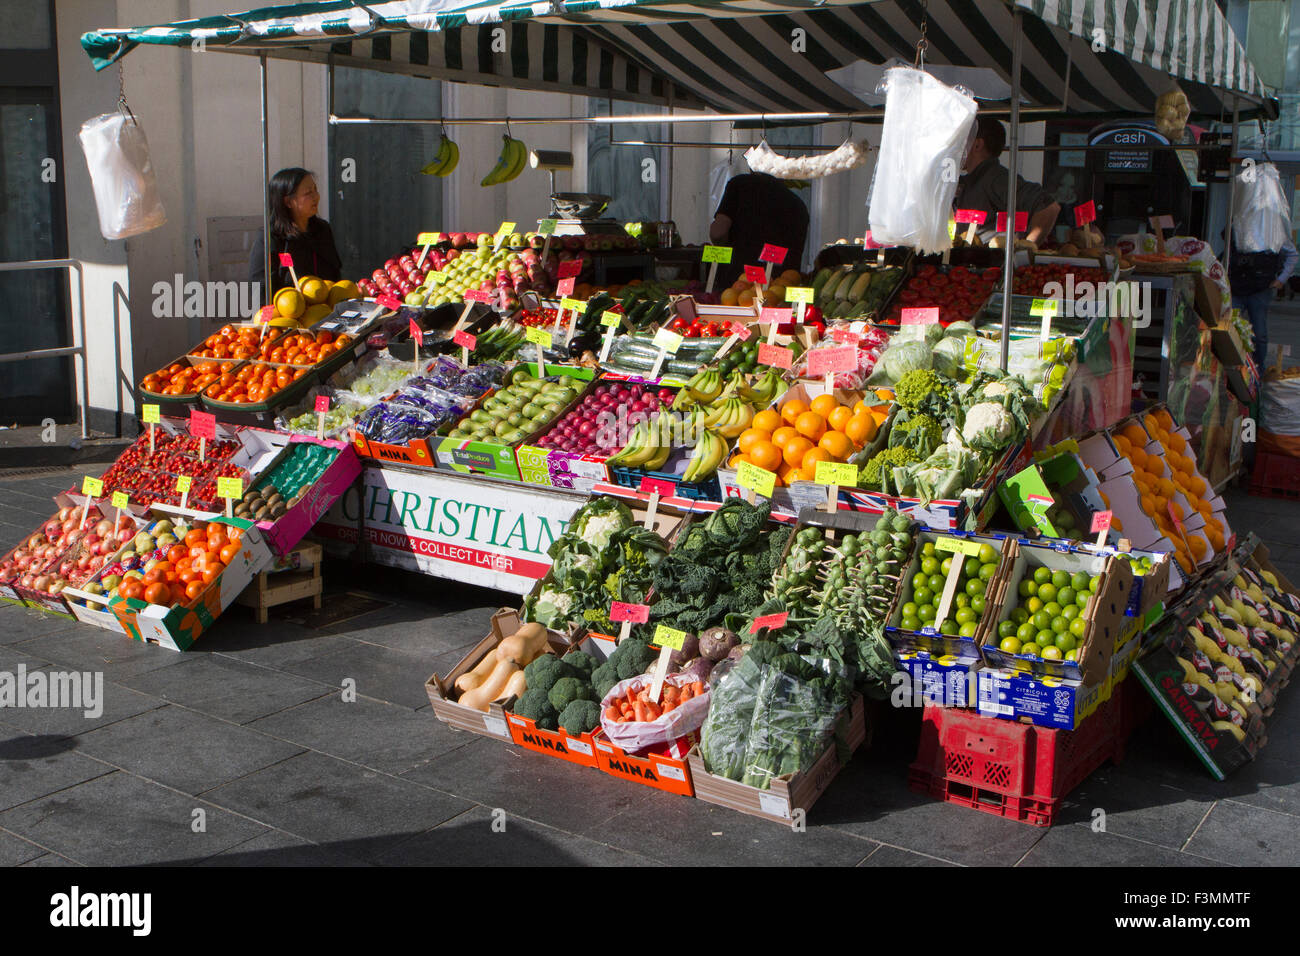 A fruit and vegetable green grocers; gorceries & vegetables on sale market stall, Liverpool City Centre, Liverpool, UK Stock Photo